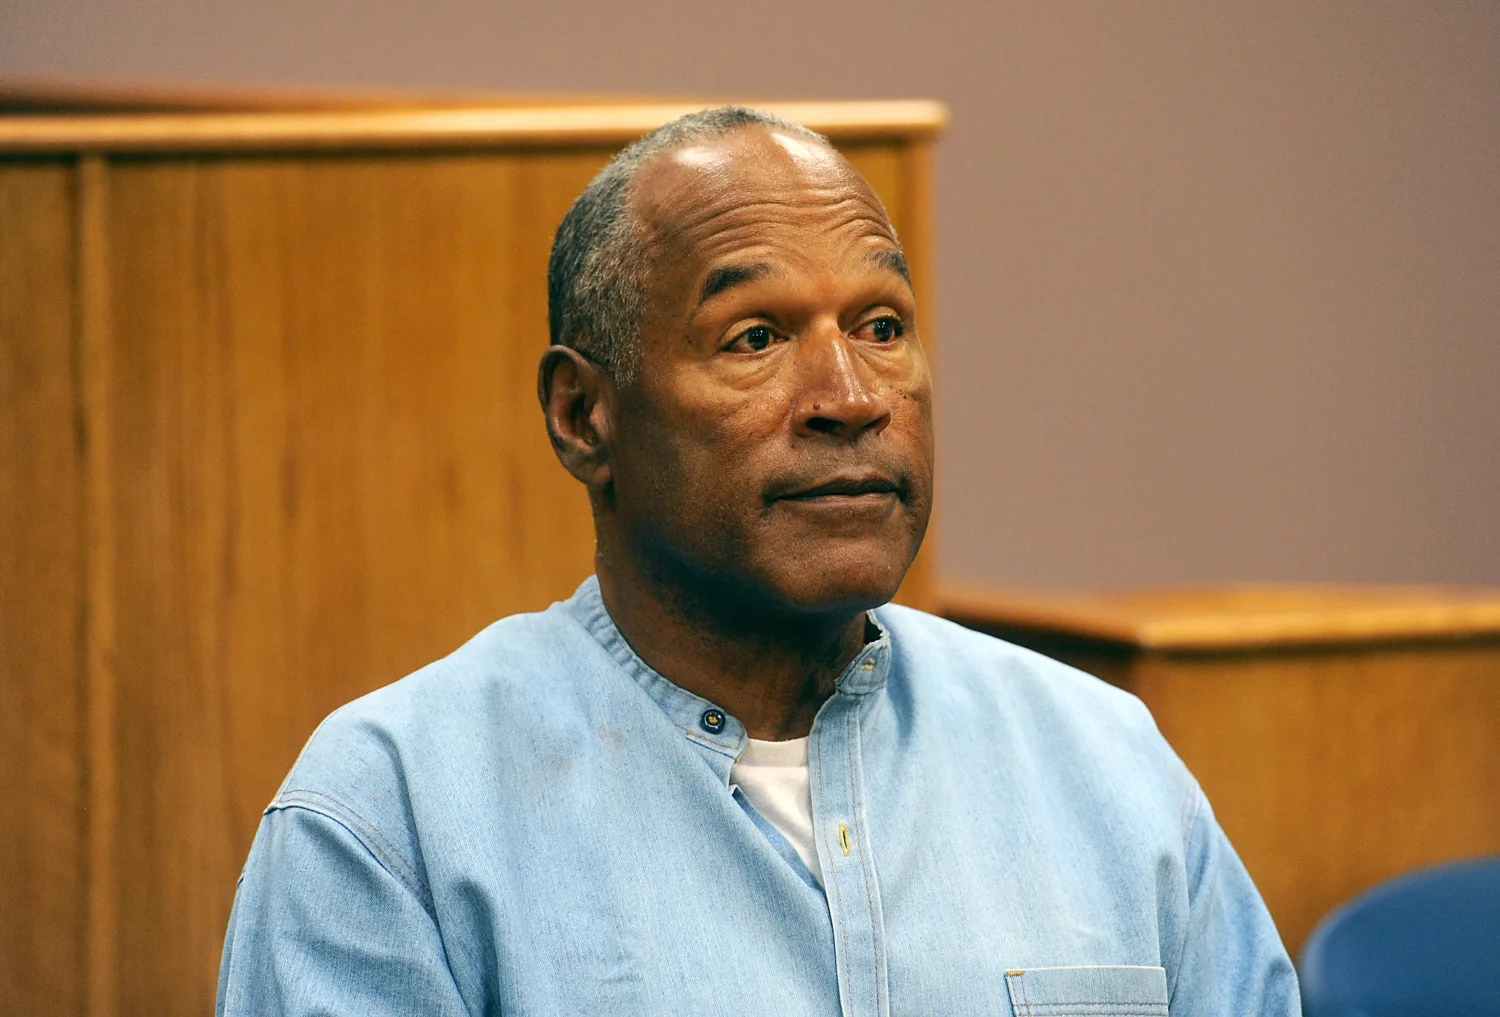 O.J. Simpson's Cause Of Death Identified